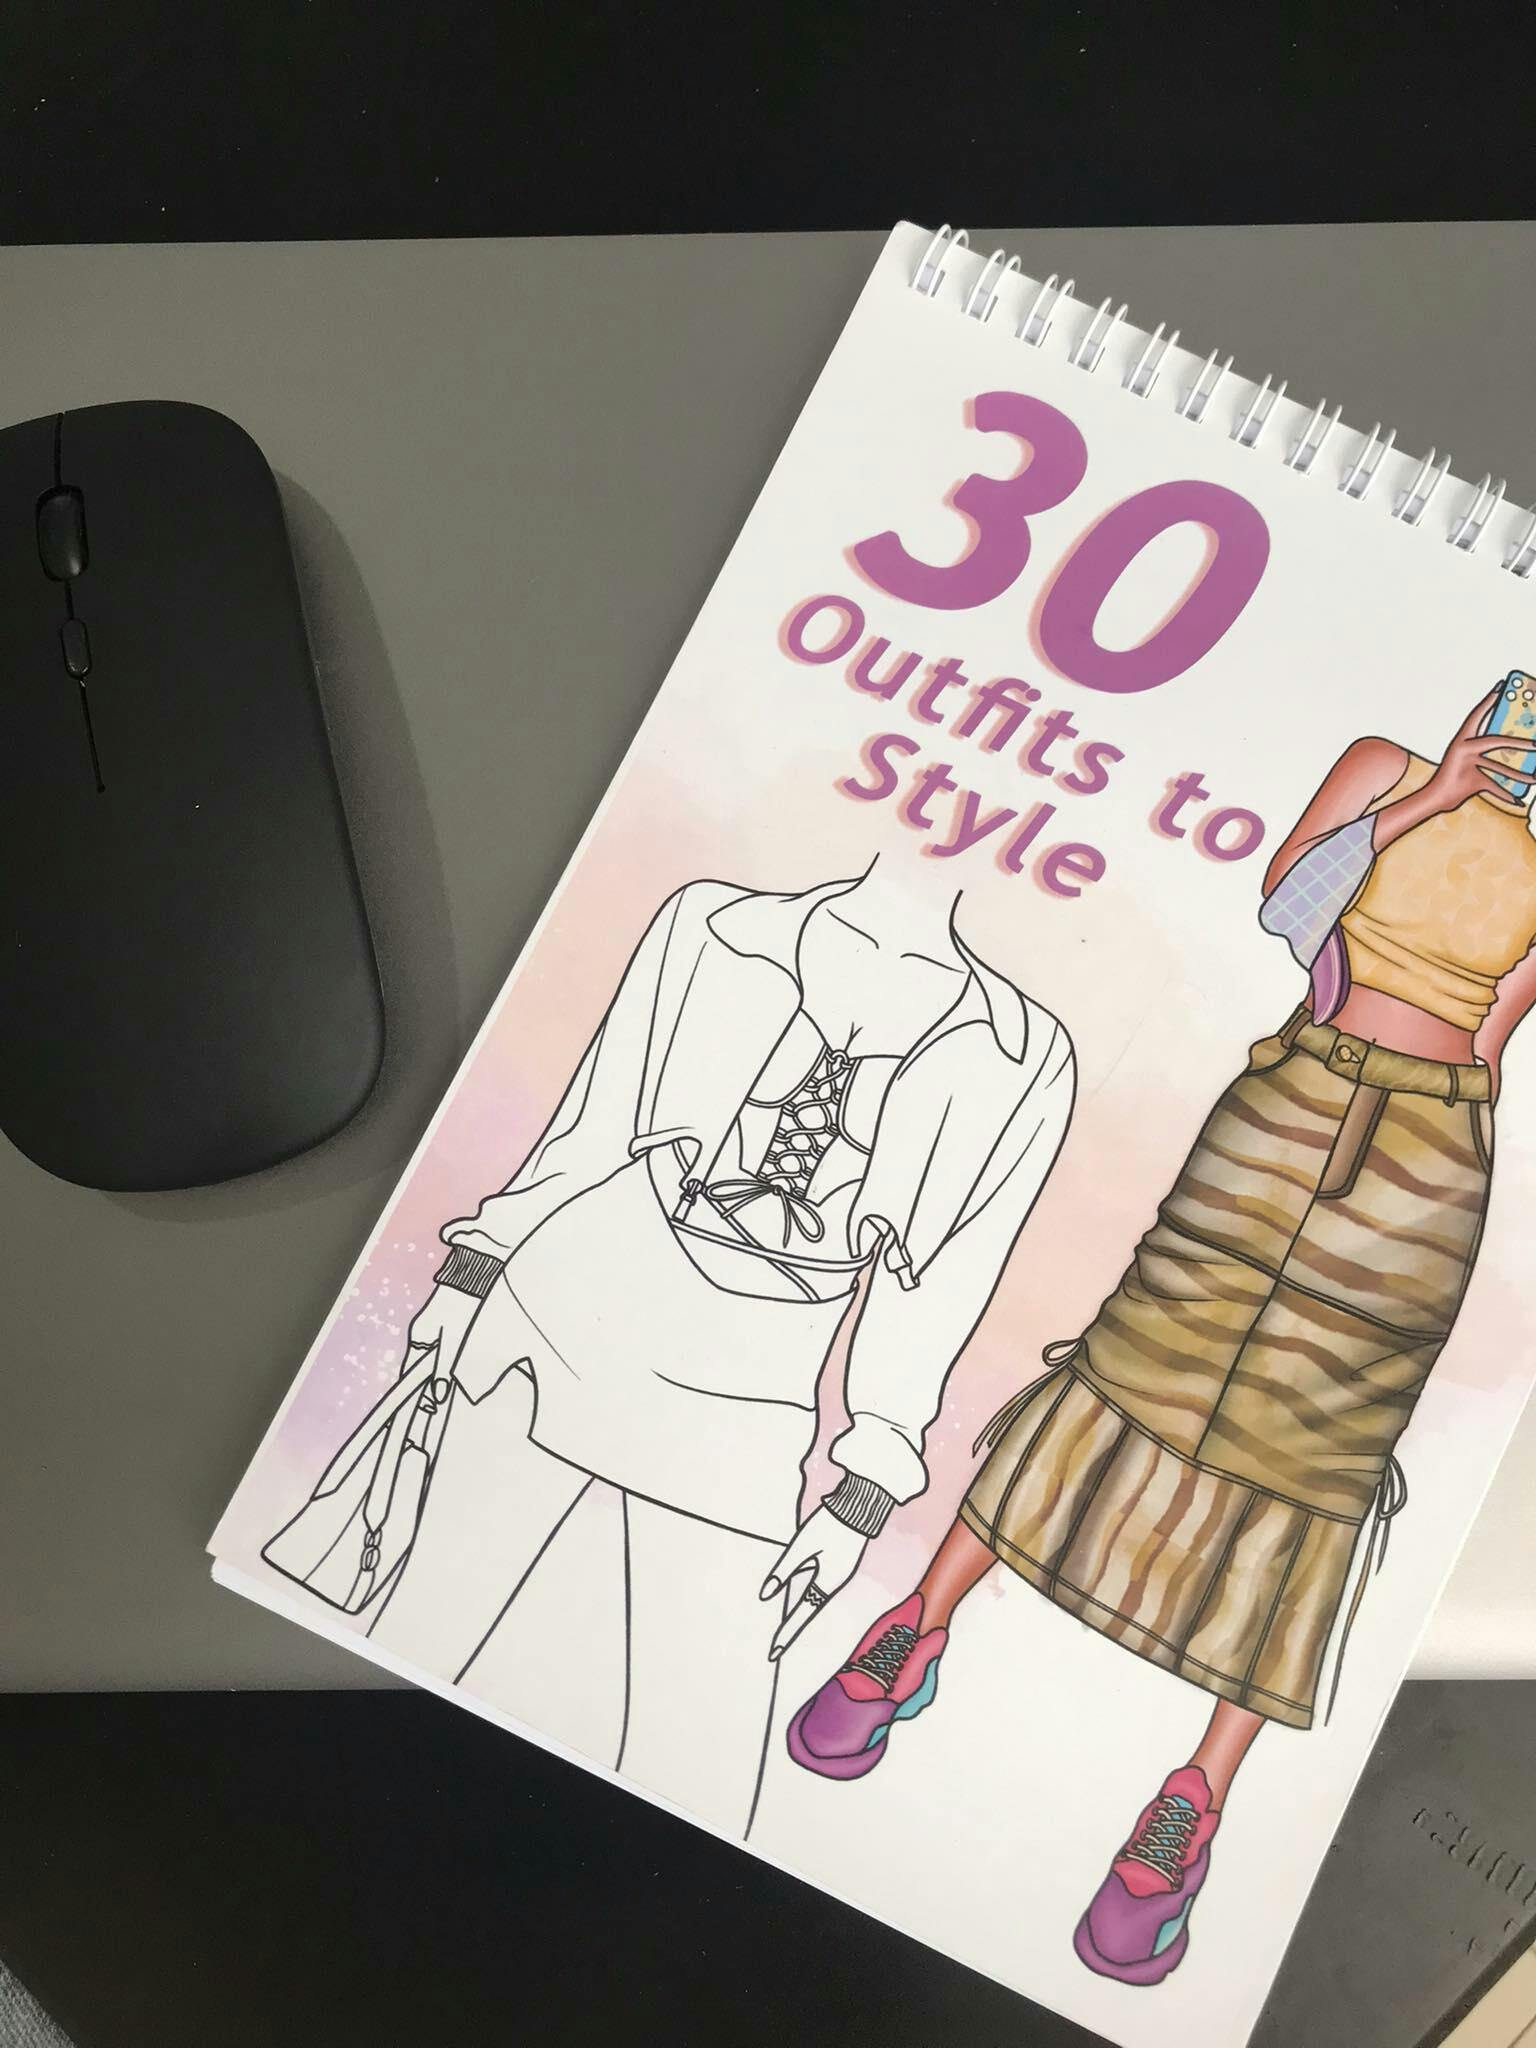 Coloring Hug™ 30 Outfits to Style - Fashion Coloring Book: Your Unique